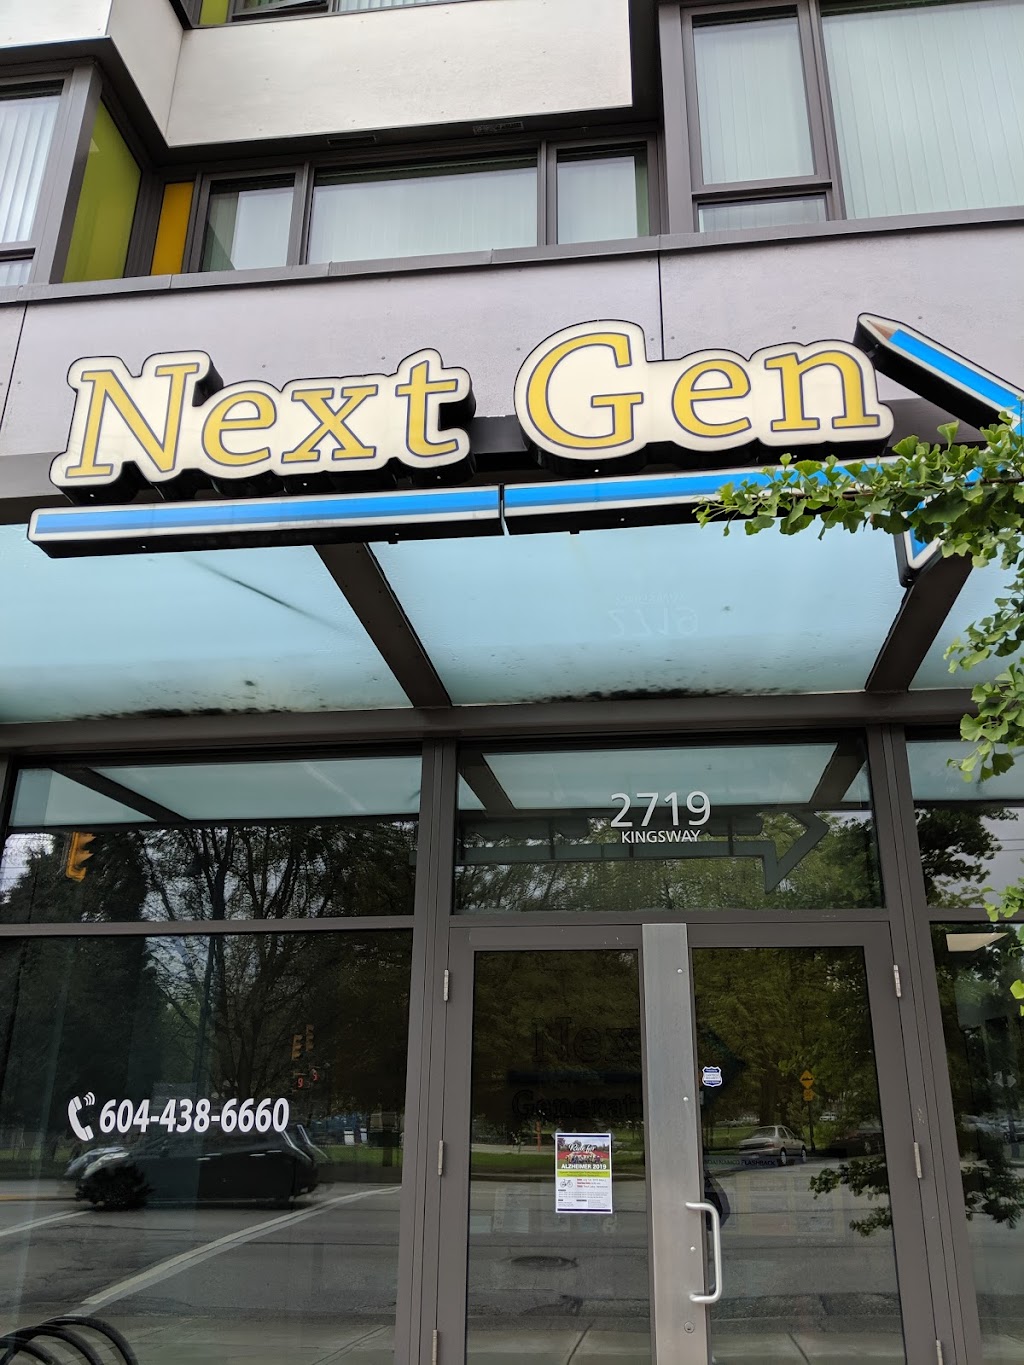 Next Gen | 2719 Kingsway, Vancouver, BC V5R 5H4, Canada | Phone: (604) 438-6660